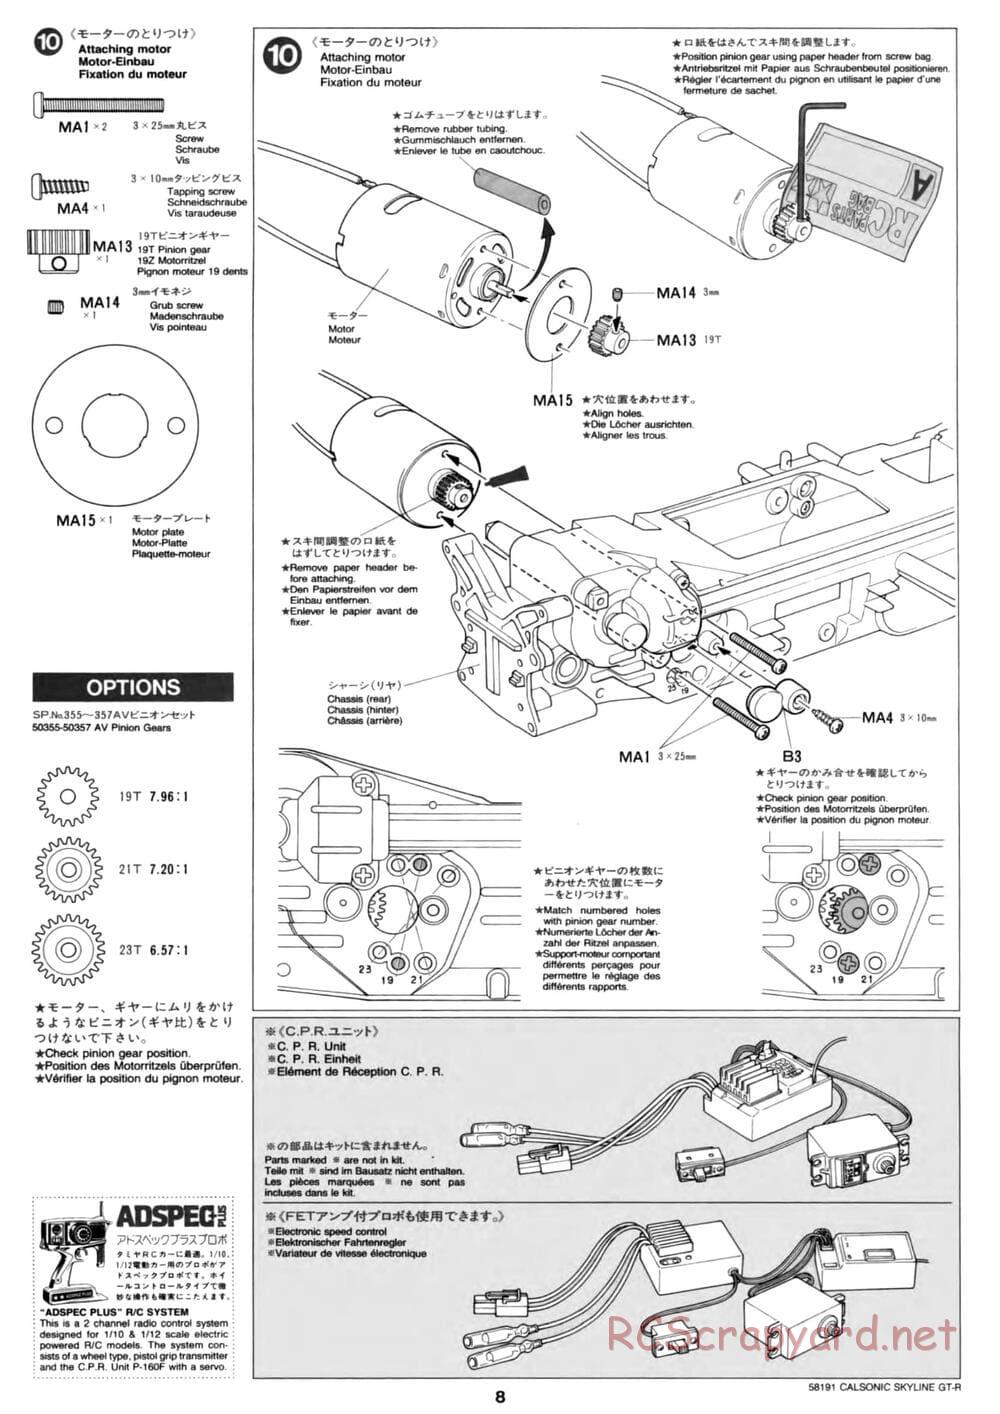 Tamiya - Calsonic Skyline GT-R - TL-01 Chassis - Manual - Page 8